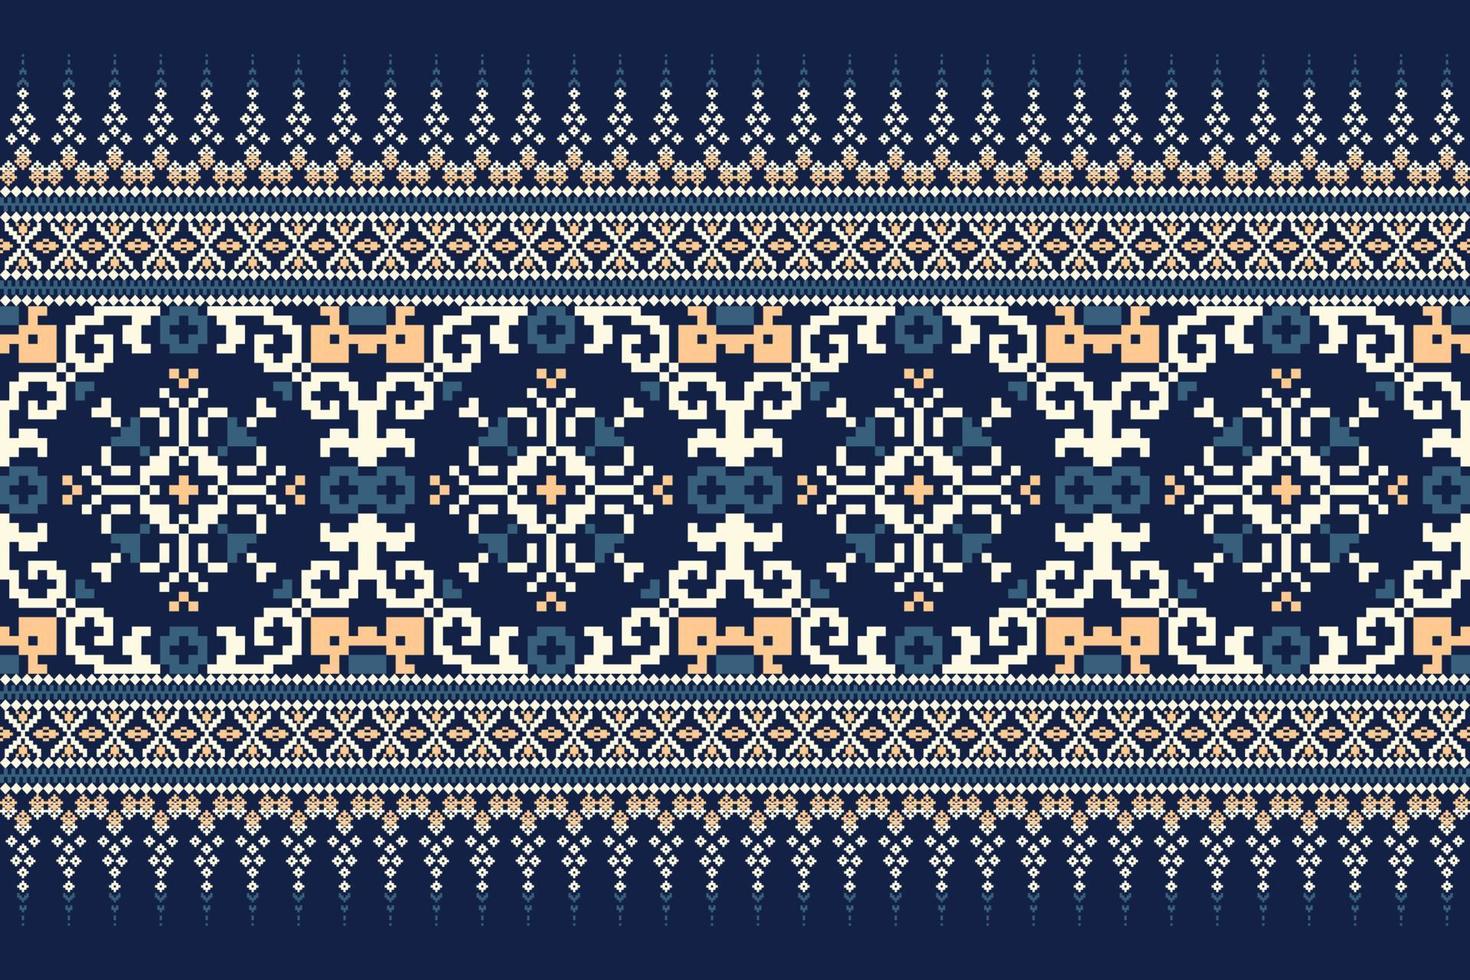 Floral Cross Stitch Embroidery on navy blue background.geometric ethnic oriental pattern traditional.Aztec style abstract vector illustration.design for texture,fabric,clothing,wrapping, decoration.